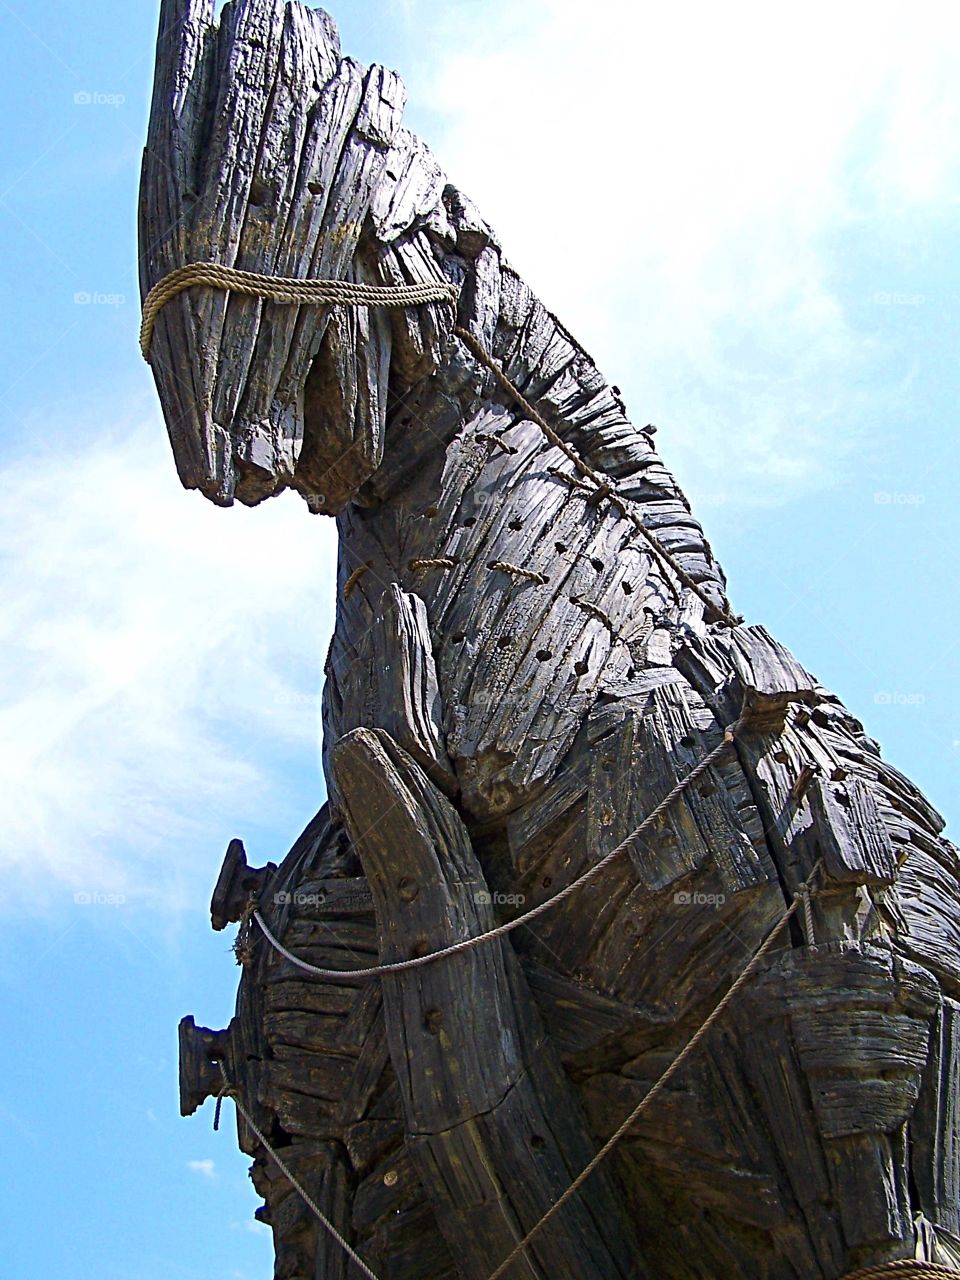 Trojan horse used to film “Troy” in Cannakale, Turkey, donated by Brad Pitt and Angelina Jolie to Turkey